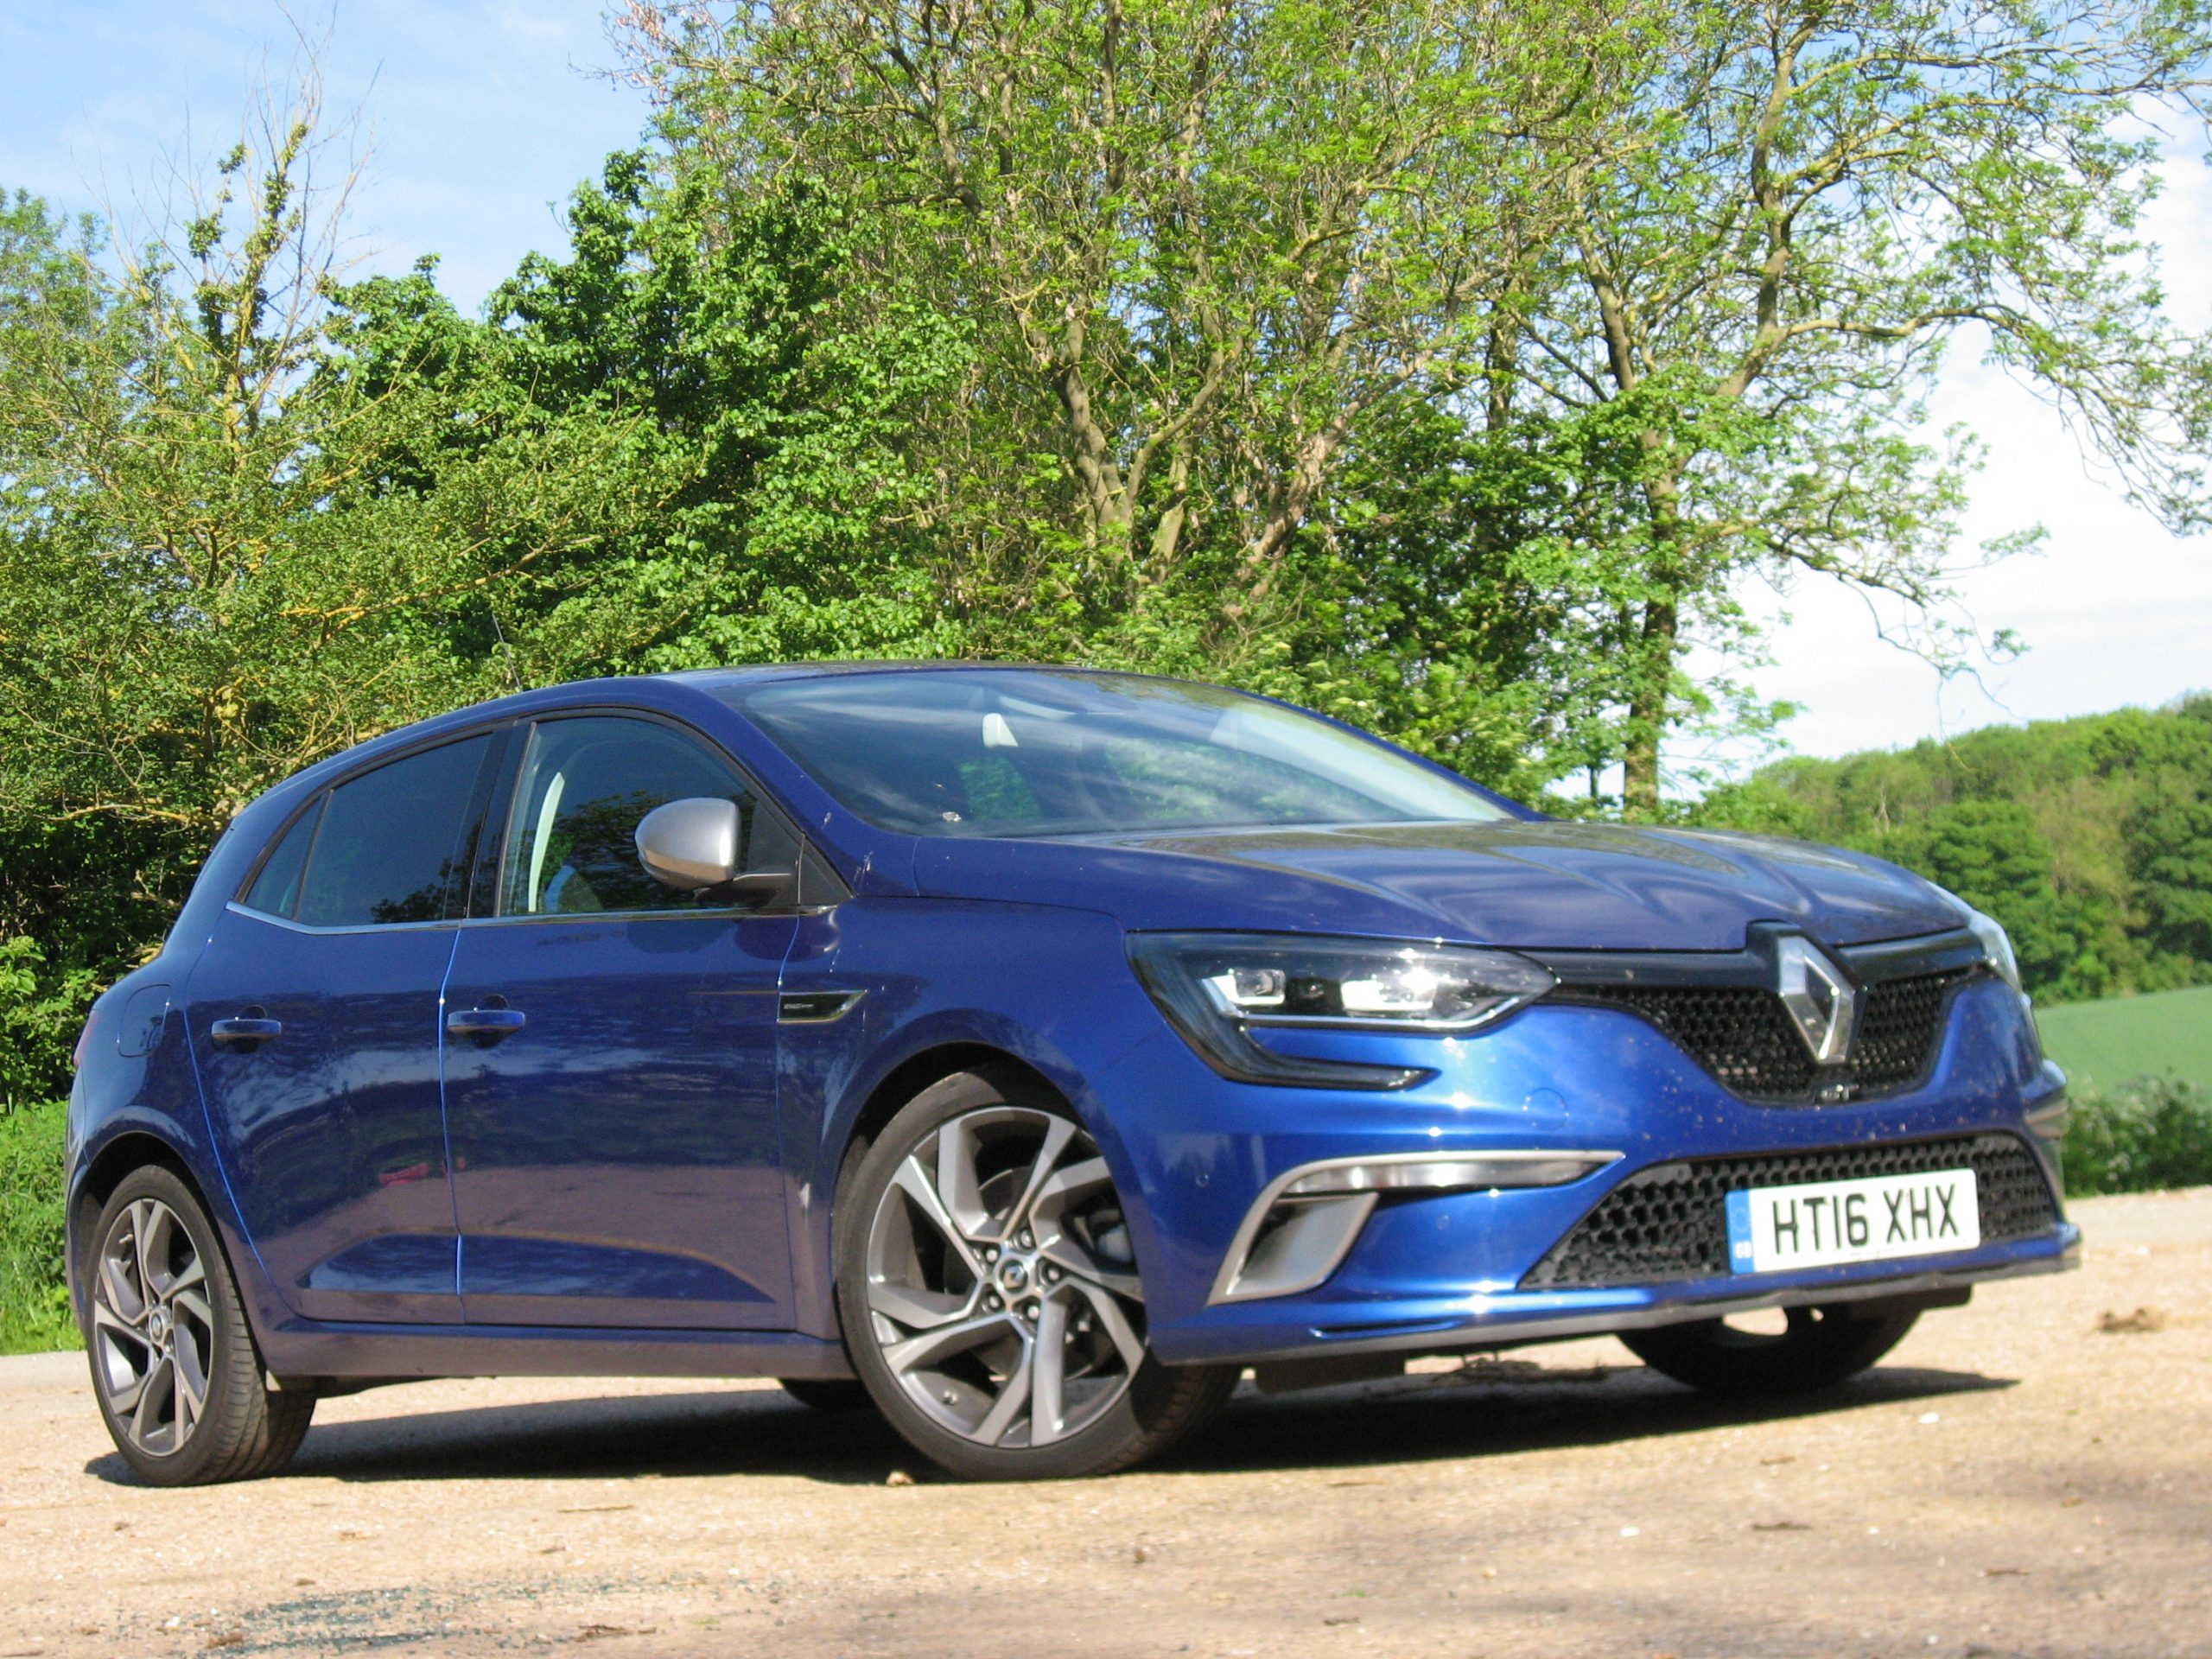 Renault Megane GT Nav 205 road test report and review